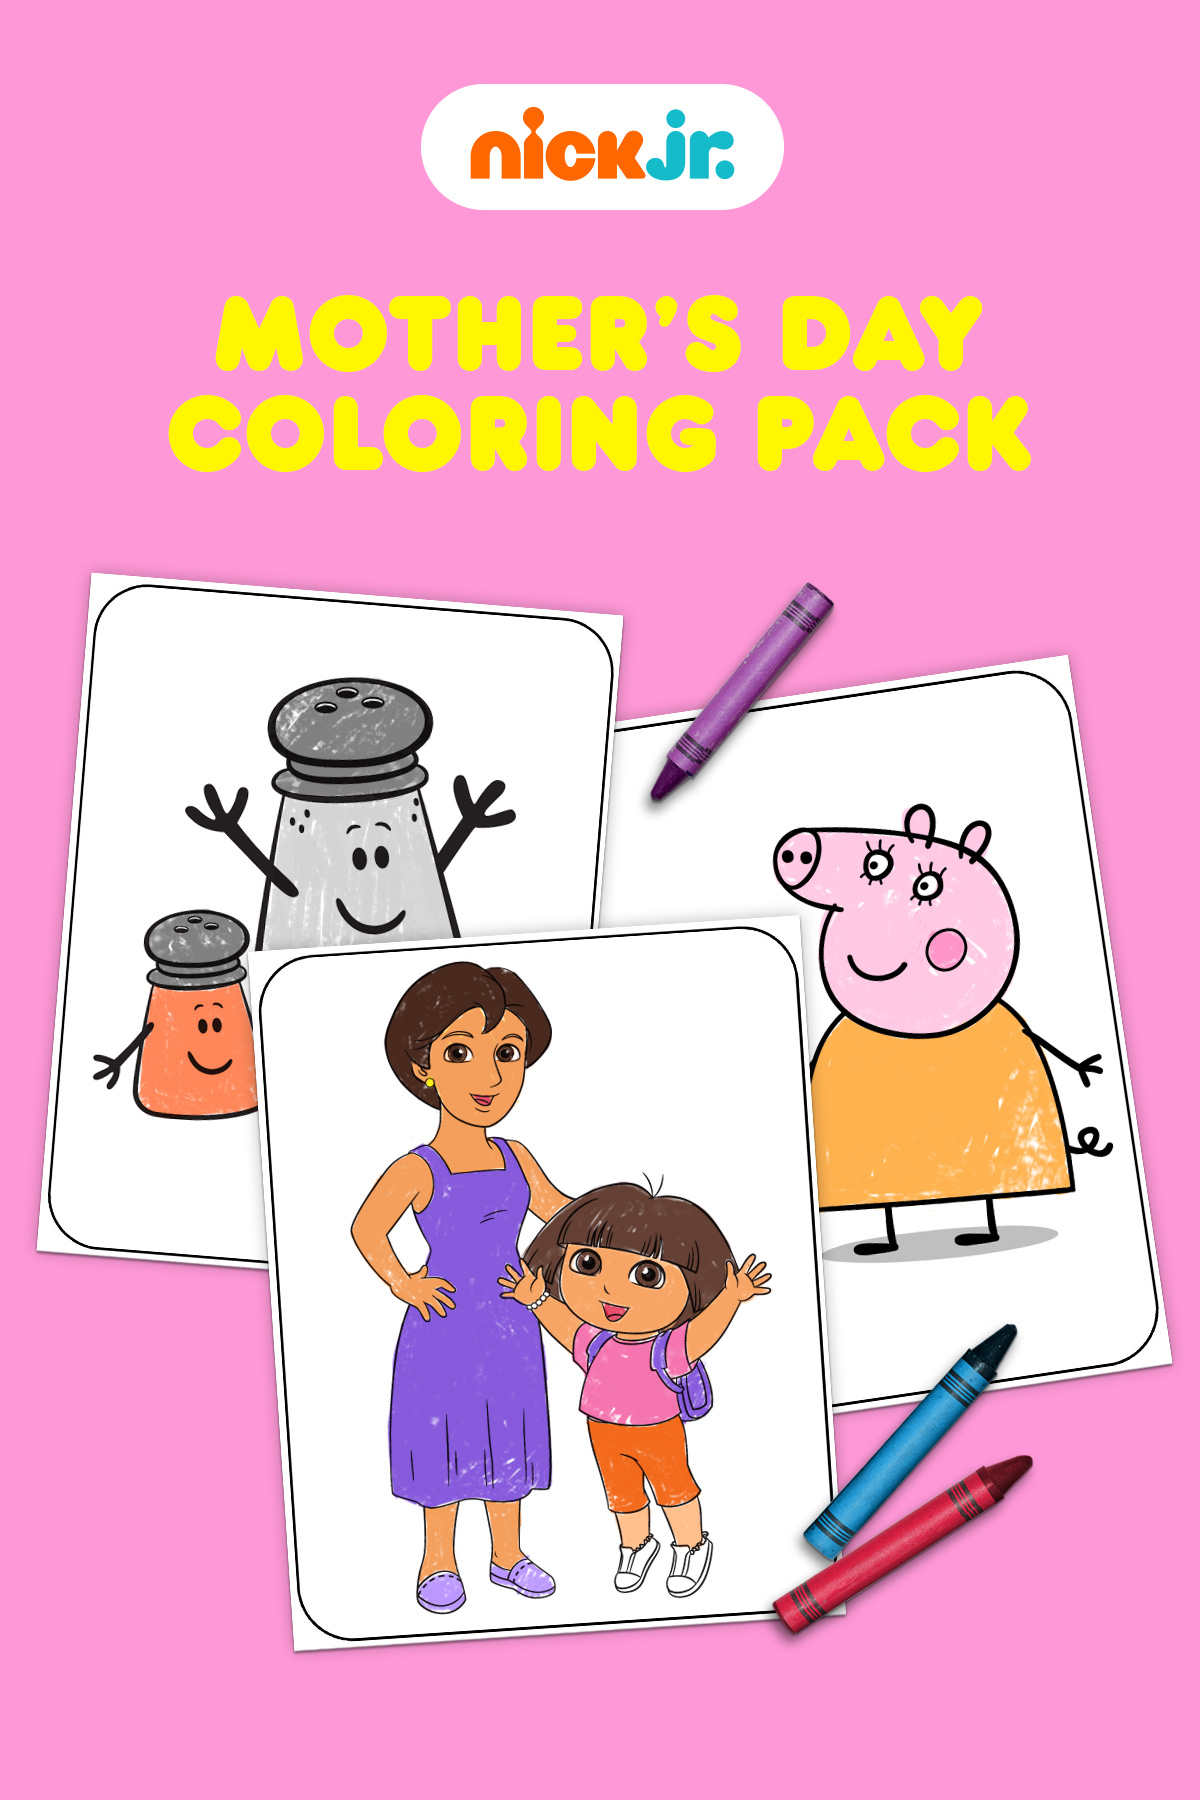 Nick Jr. Mother's Day Coloring Pack